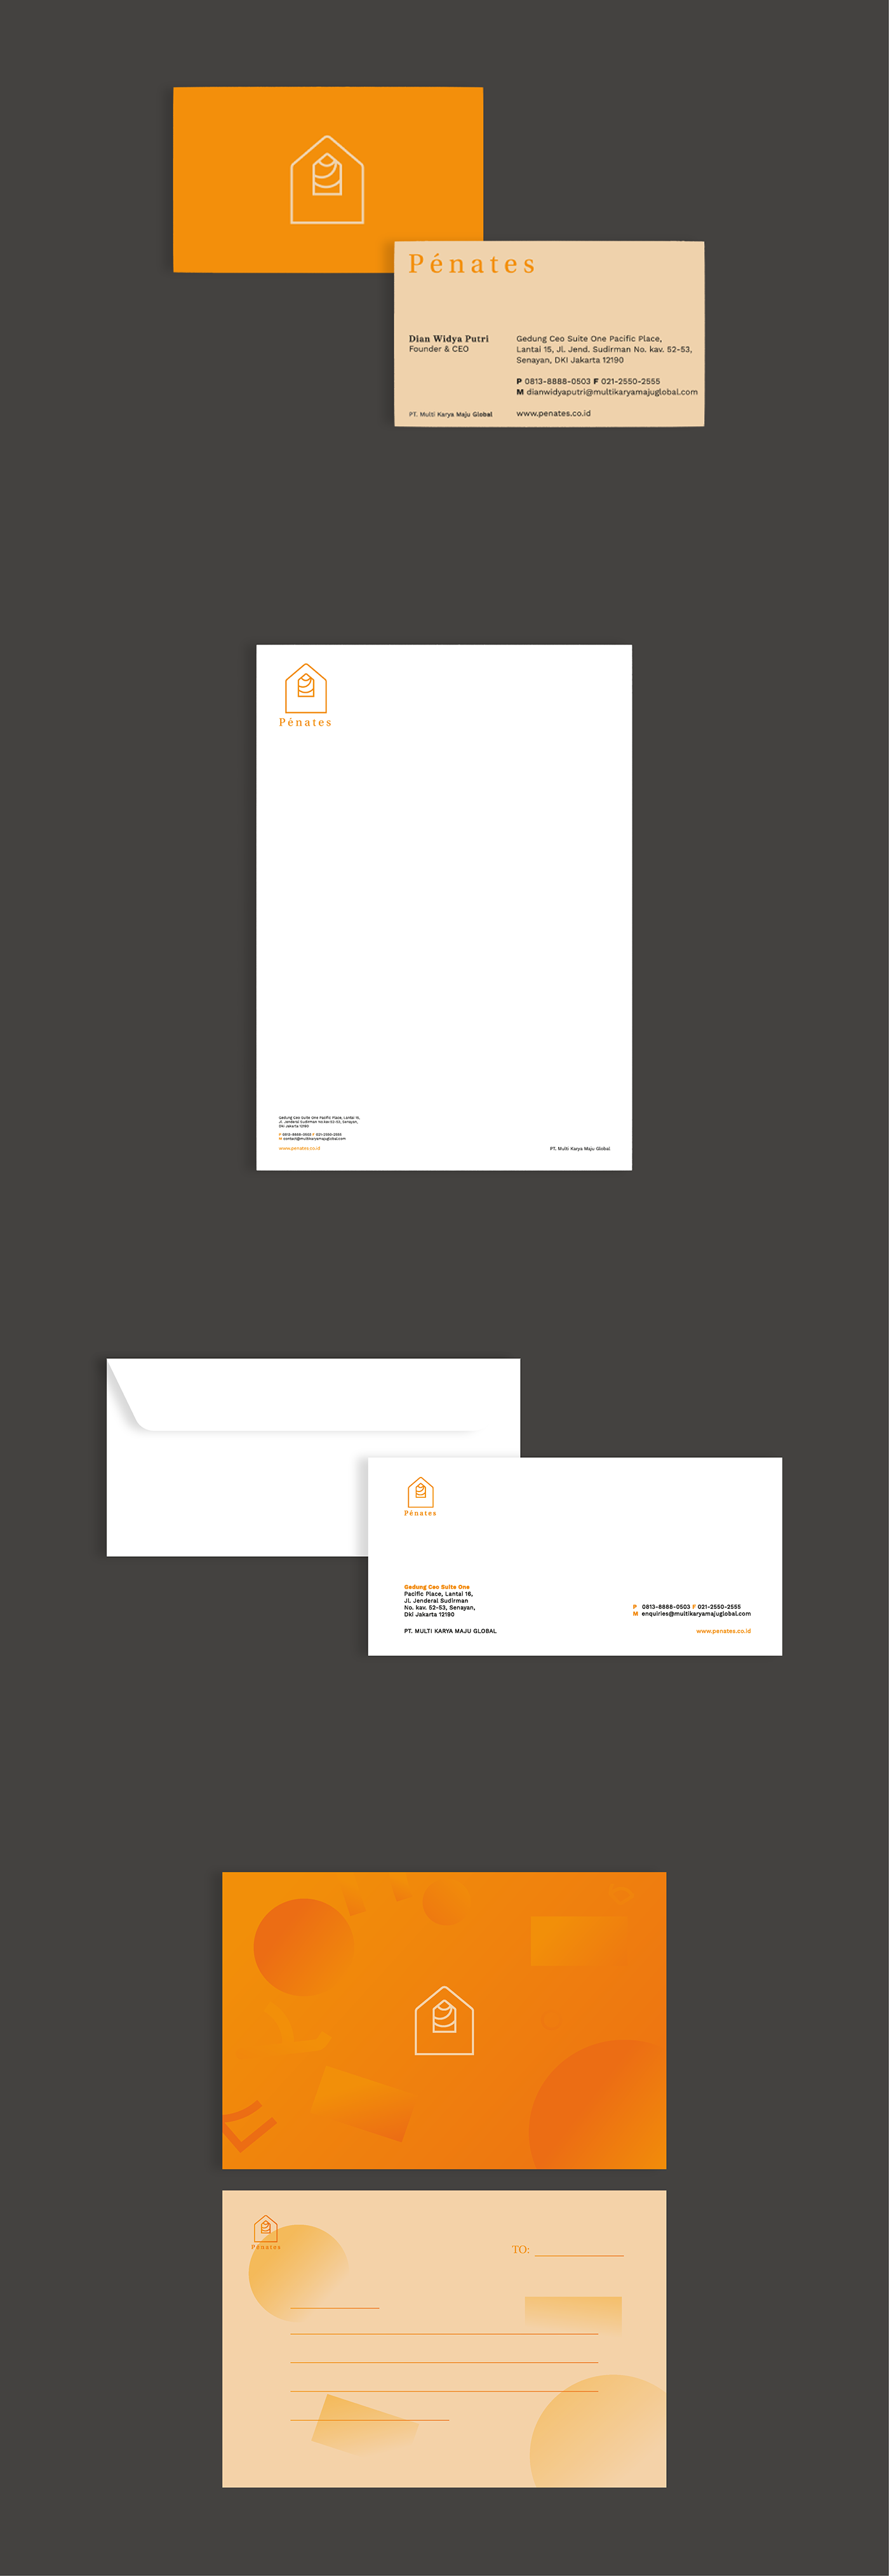 branding  Collateral Freelance graphicdesign home homeware identity logo penates Project